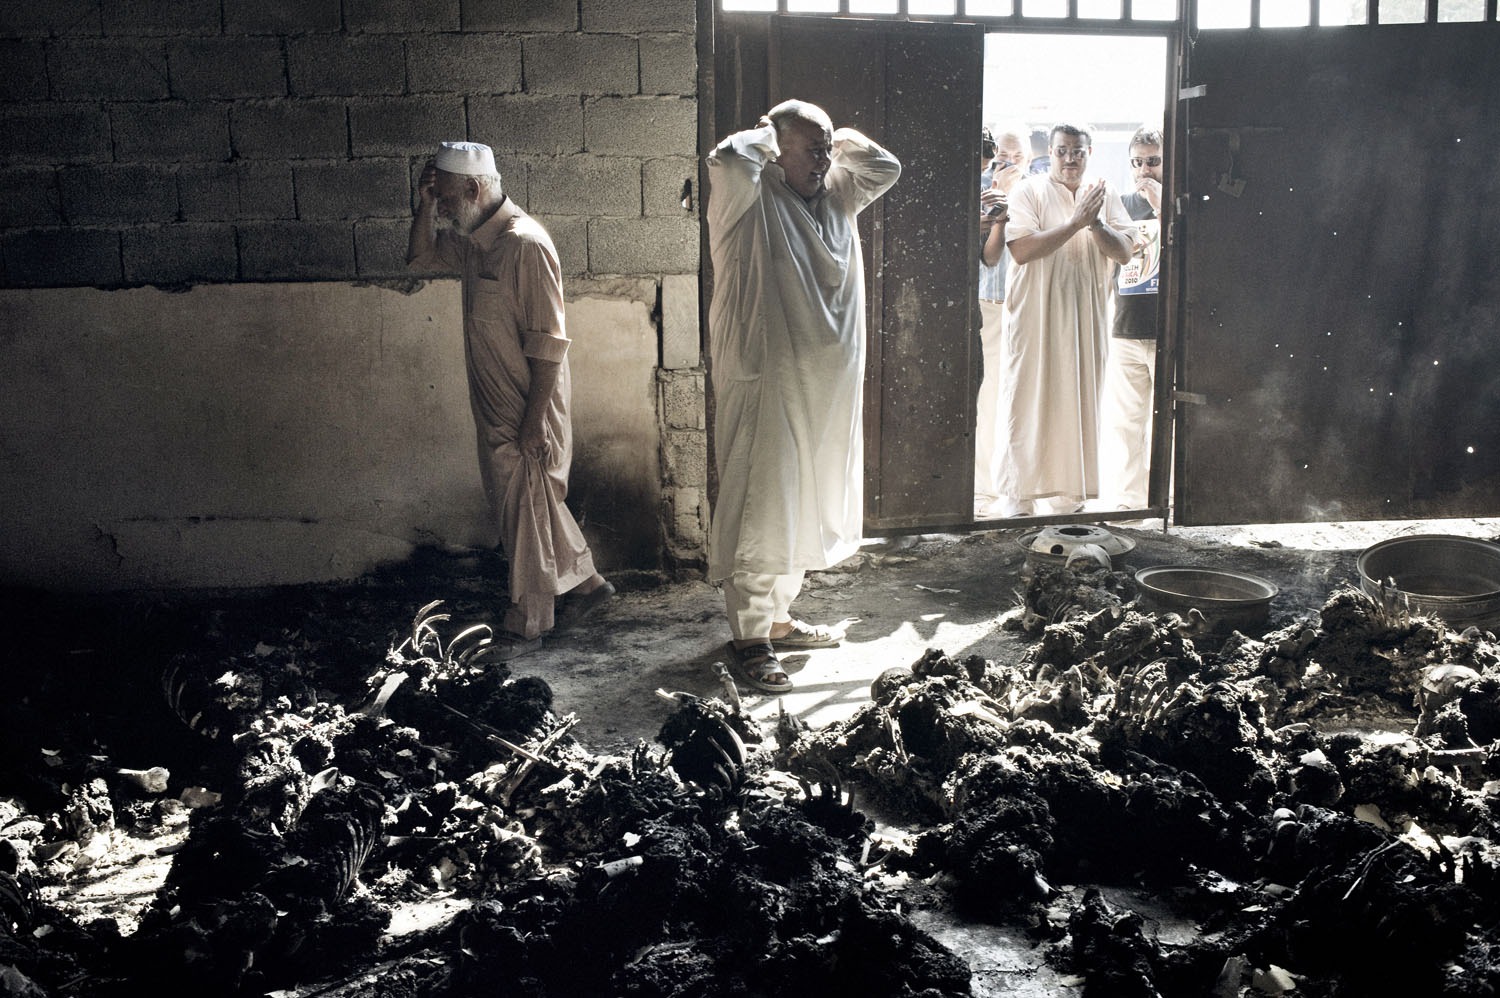 Yuri Kozyrev. From  The Savage and the Strange.  September 12, 2011 issue.
                              A rebel fighter walks inside a warehouse containing the remains of at least 50 burned bodies in Tripoli, Libya on August 28, 2011. A survivor said they were civilians killed by pro-Gaddafi soldiers.